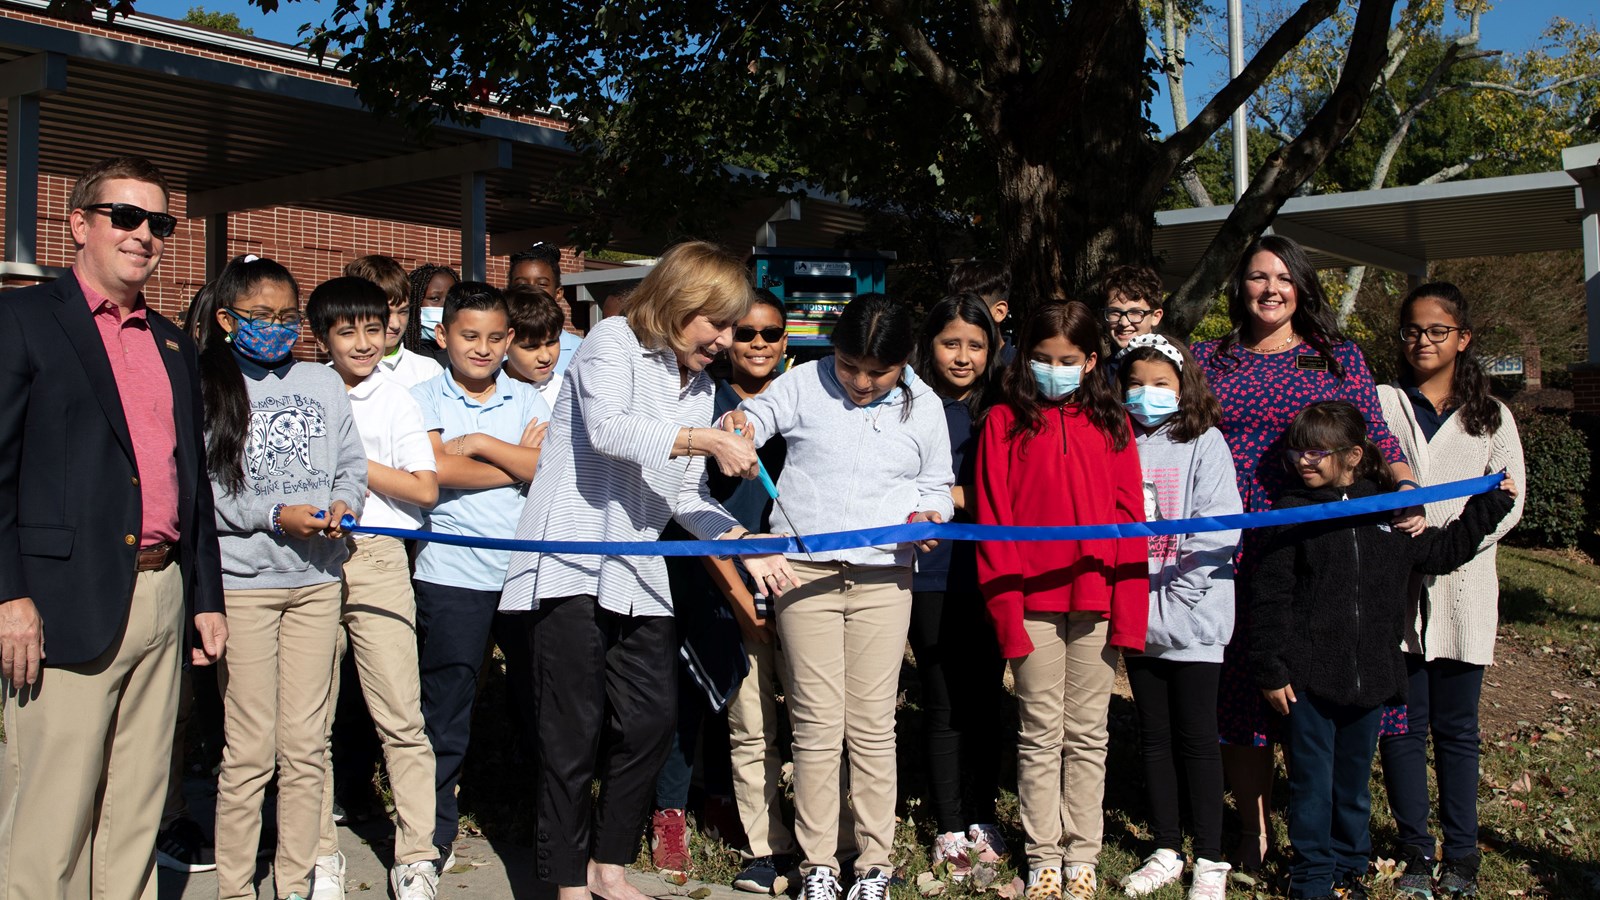 Belmont Hills Elementary School students with help of community members help cut the ribbon on the school’s new Little Free Library.